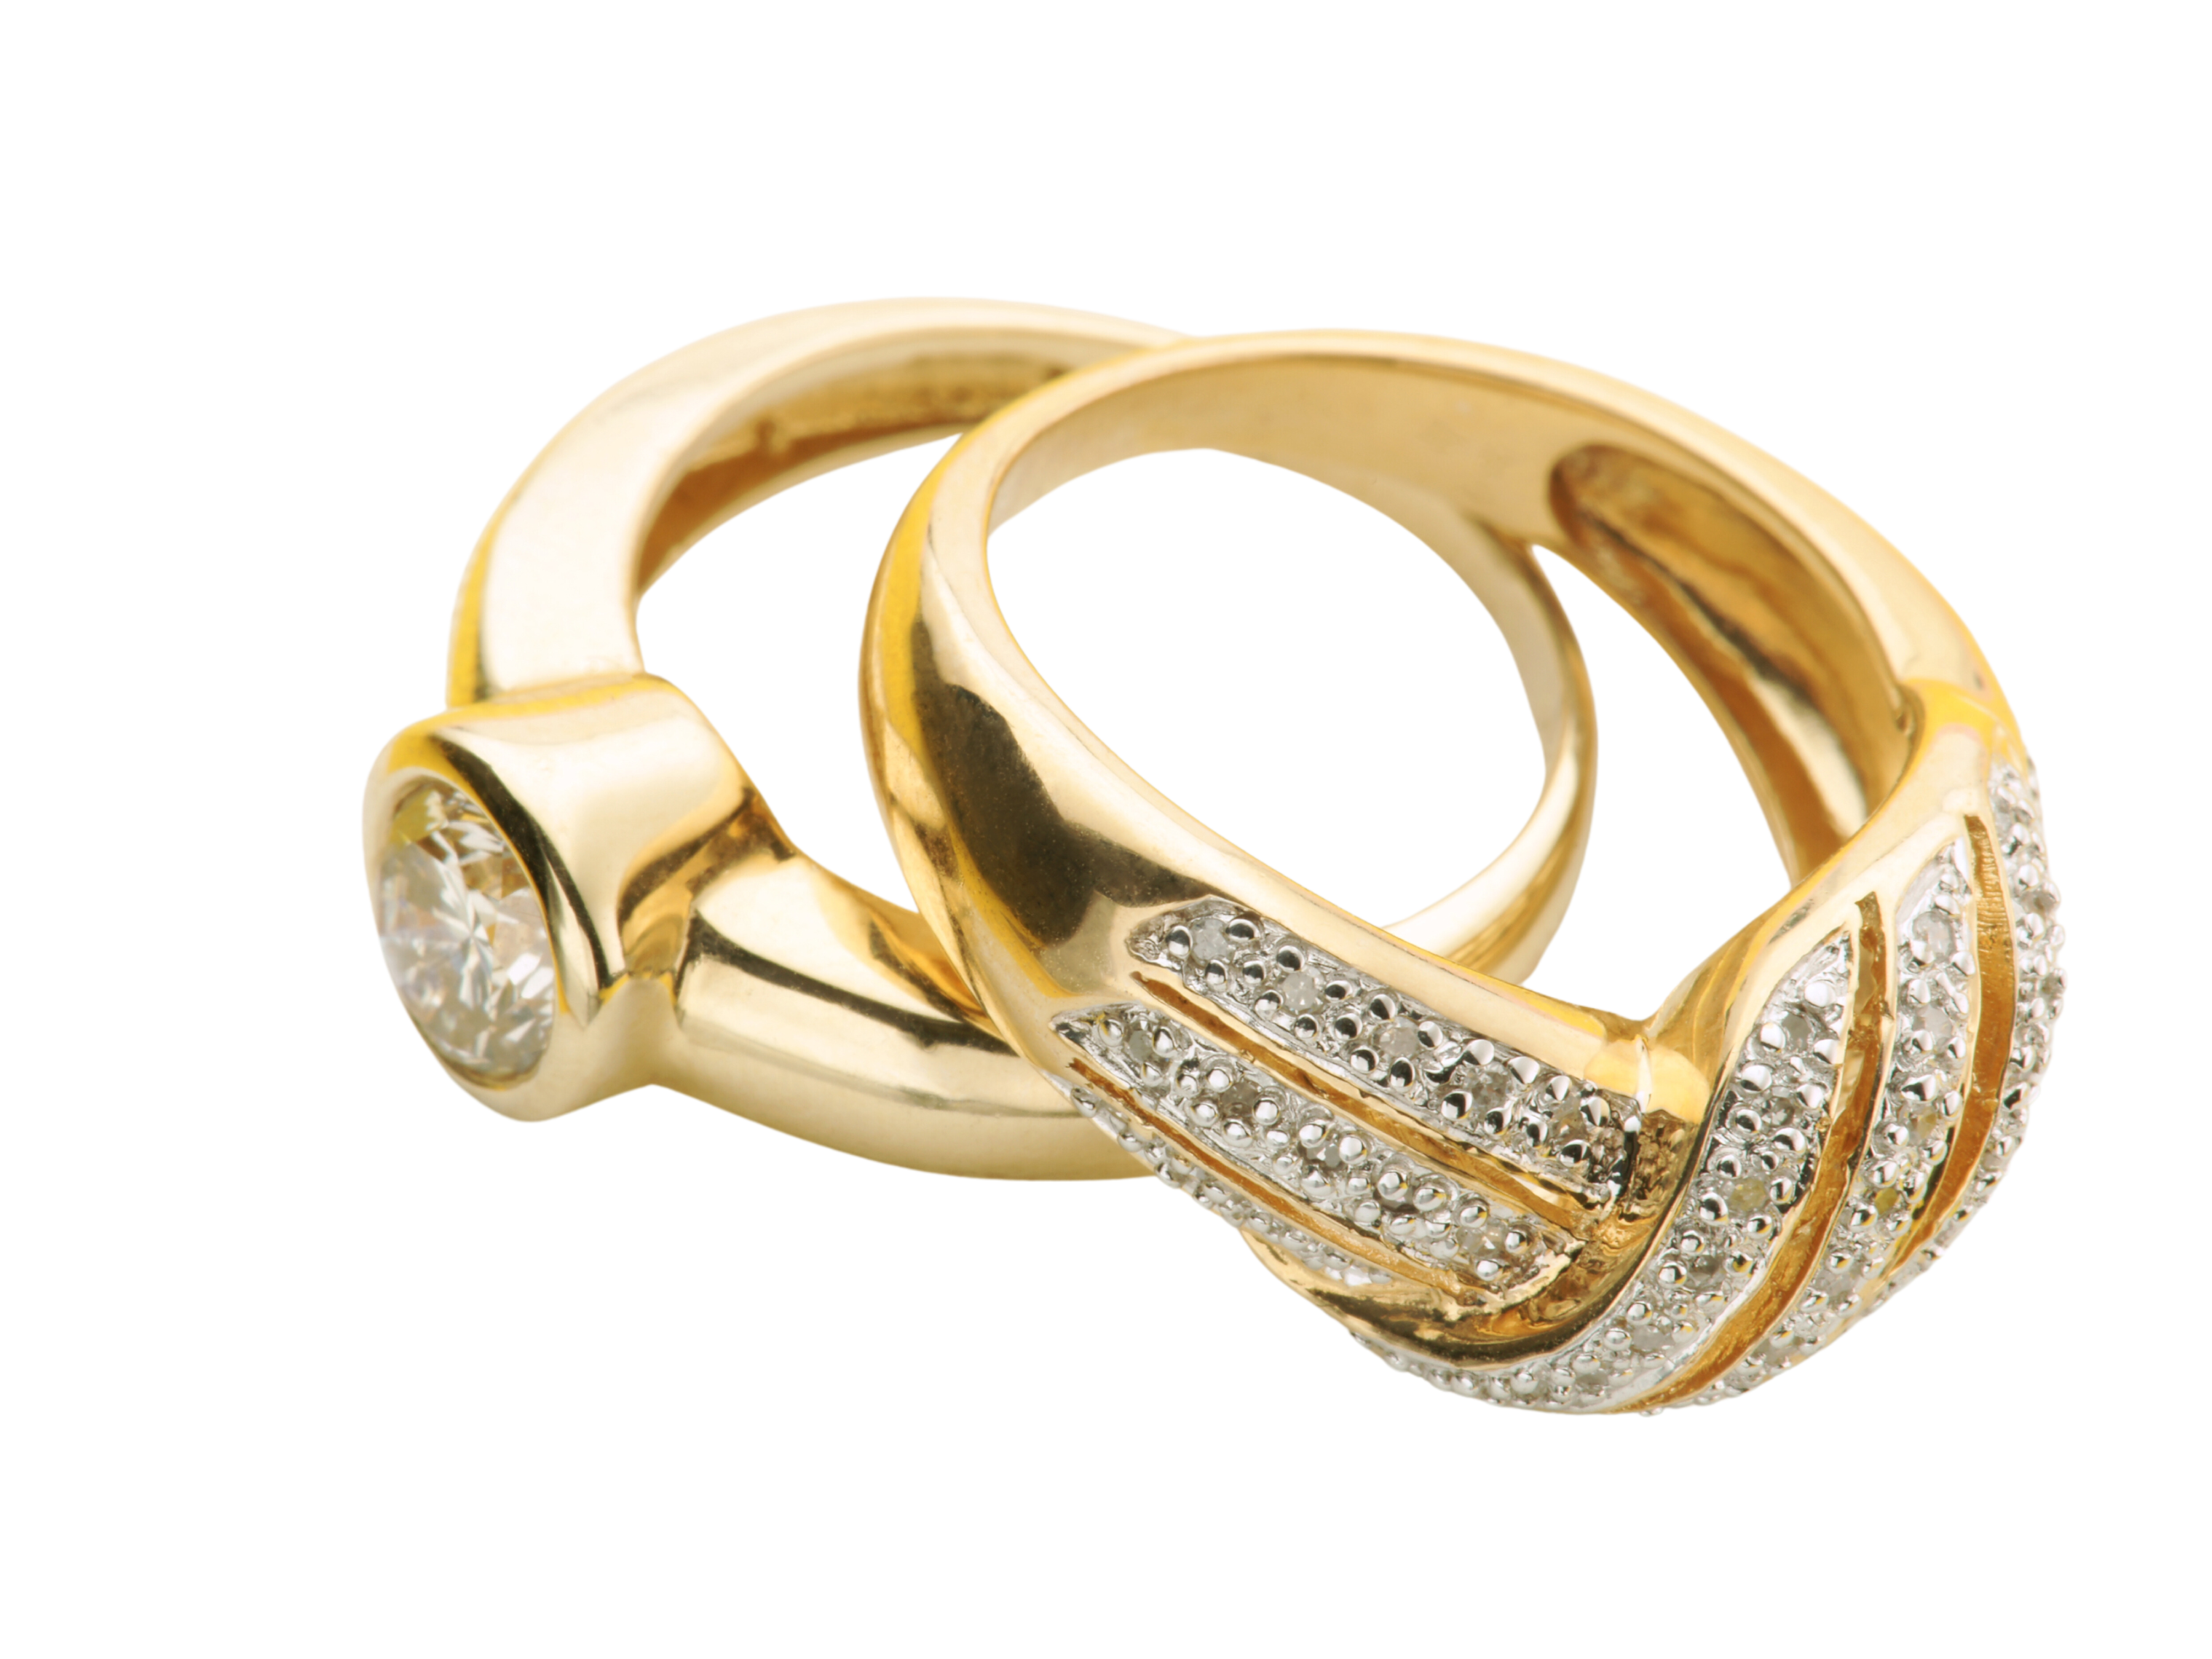 2 rings that have been gold plated - The Importance Of Gold Plating